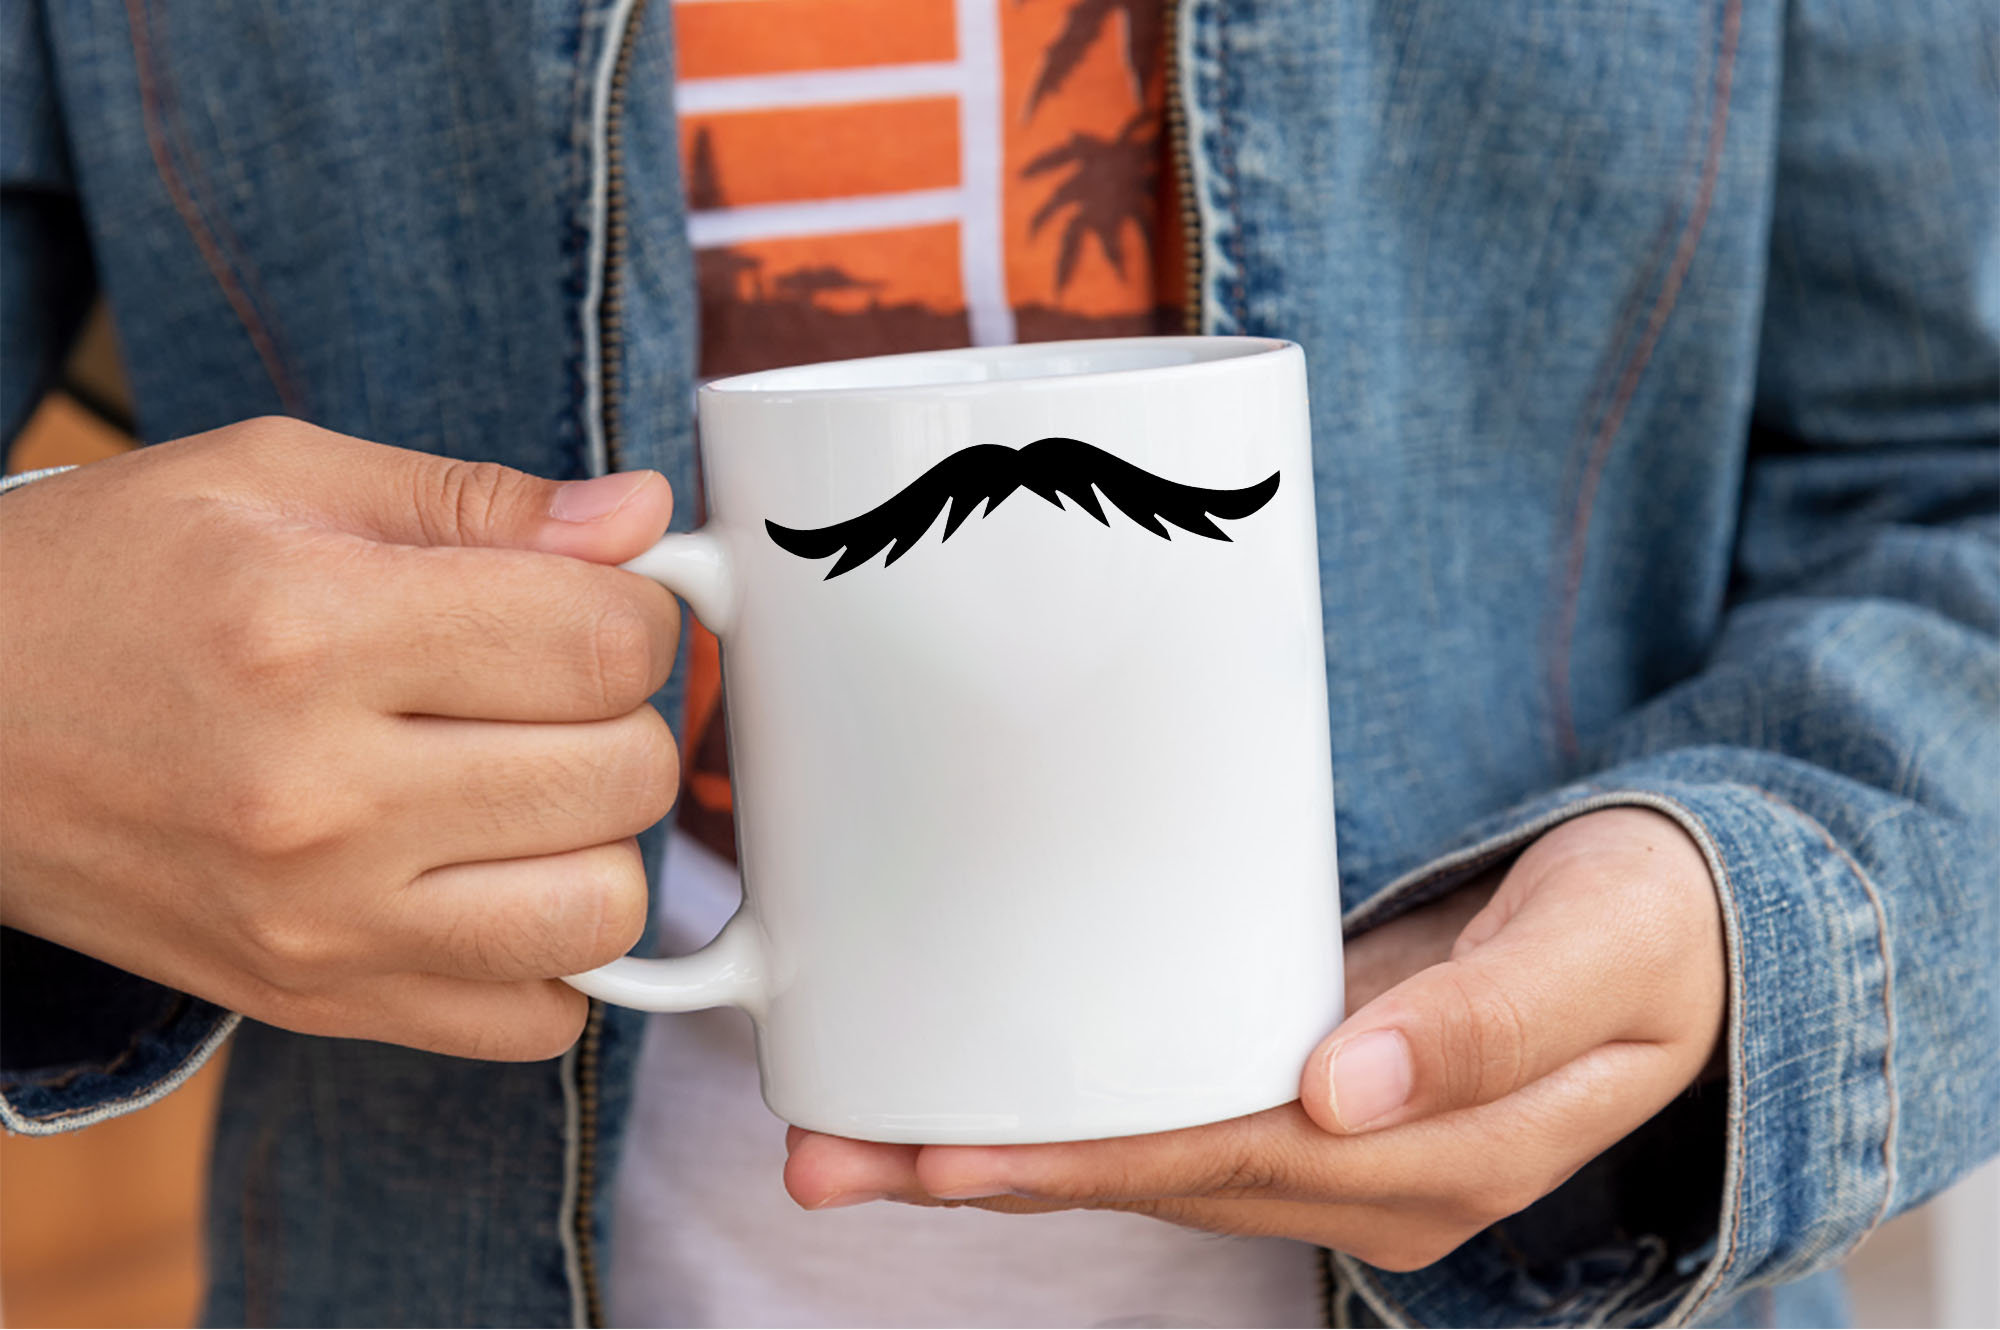 Mugs Cups Men Funny Coffee Cup Tea Gift Elegant Man Mustache With